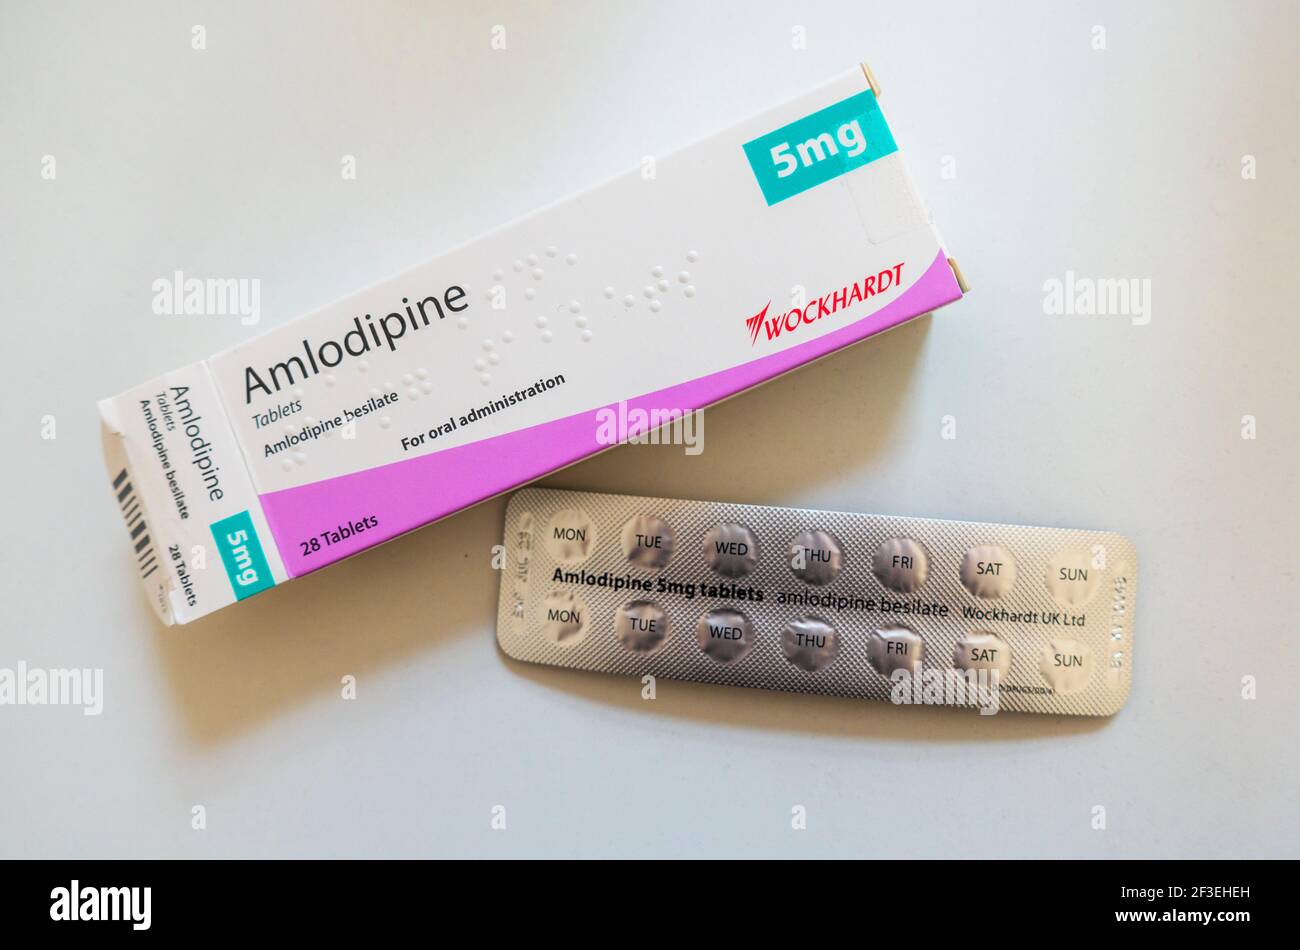 Amlodipine 5 mg is a blood pressure medication, a calcium channel blocker to treat high blood pressure and coronary artery disease. Stock Photo